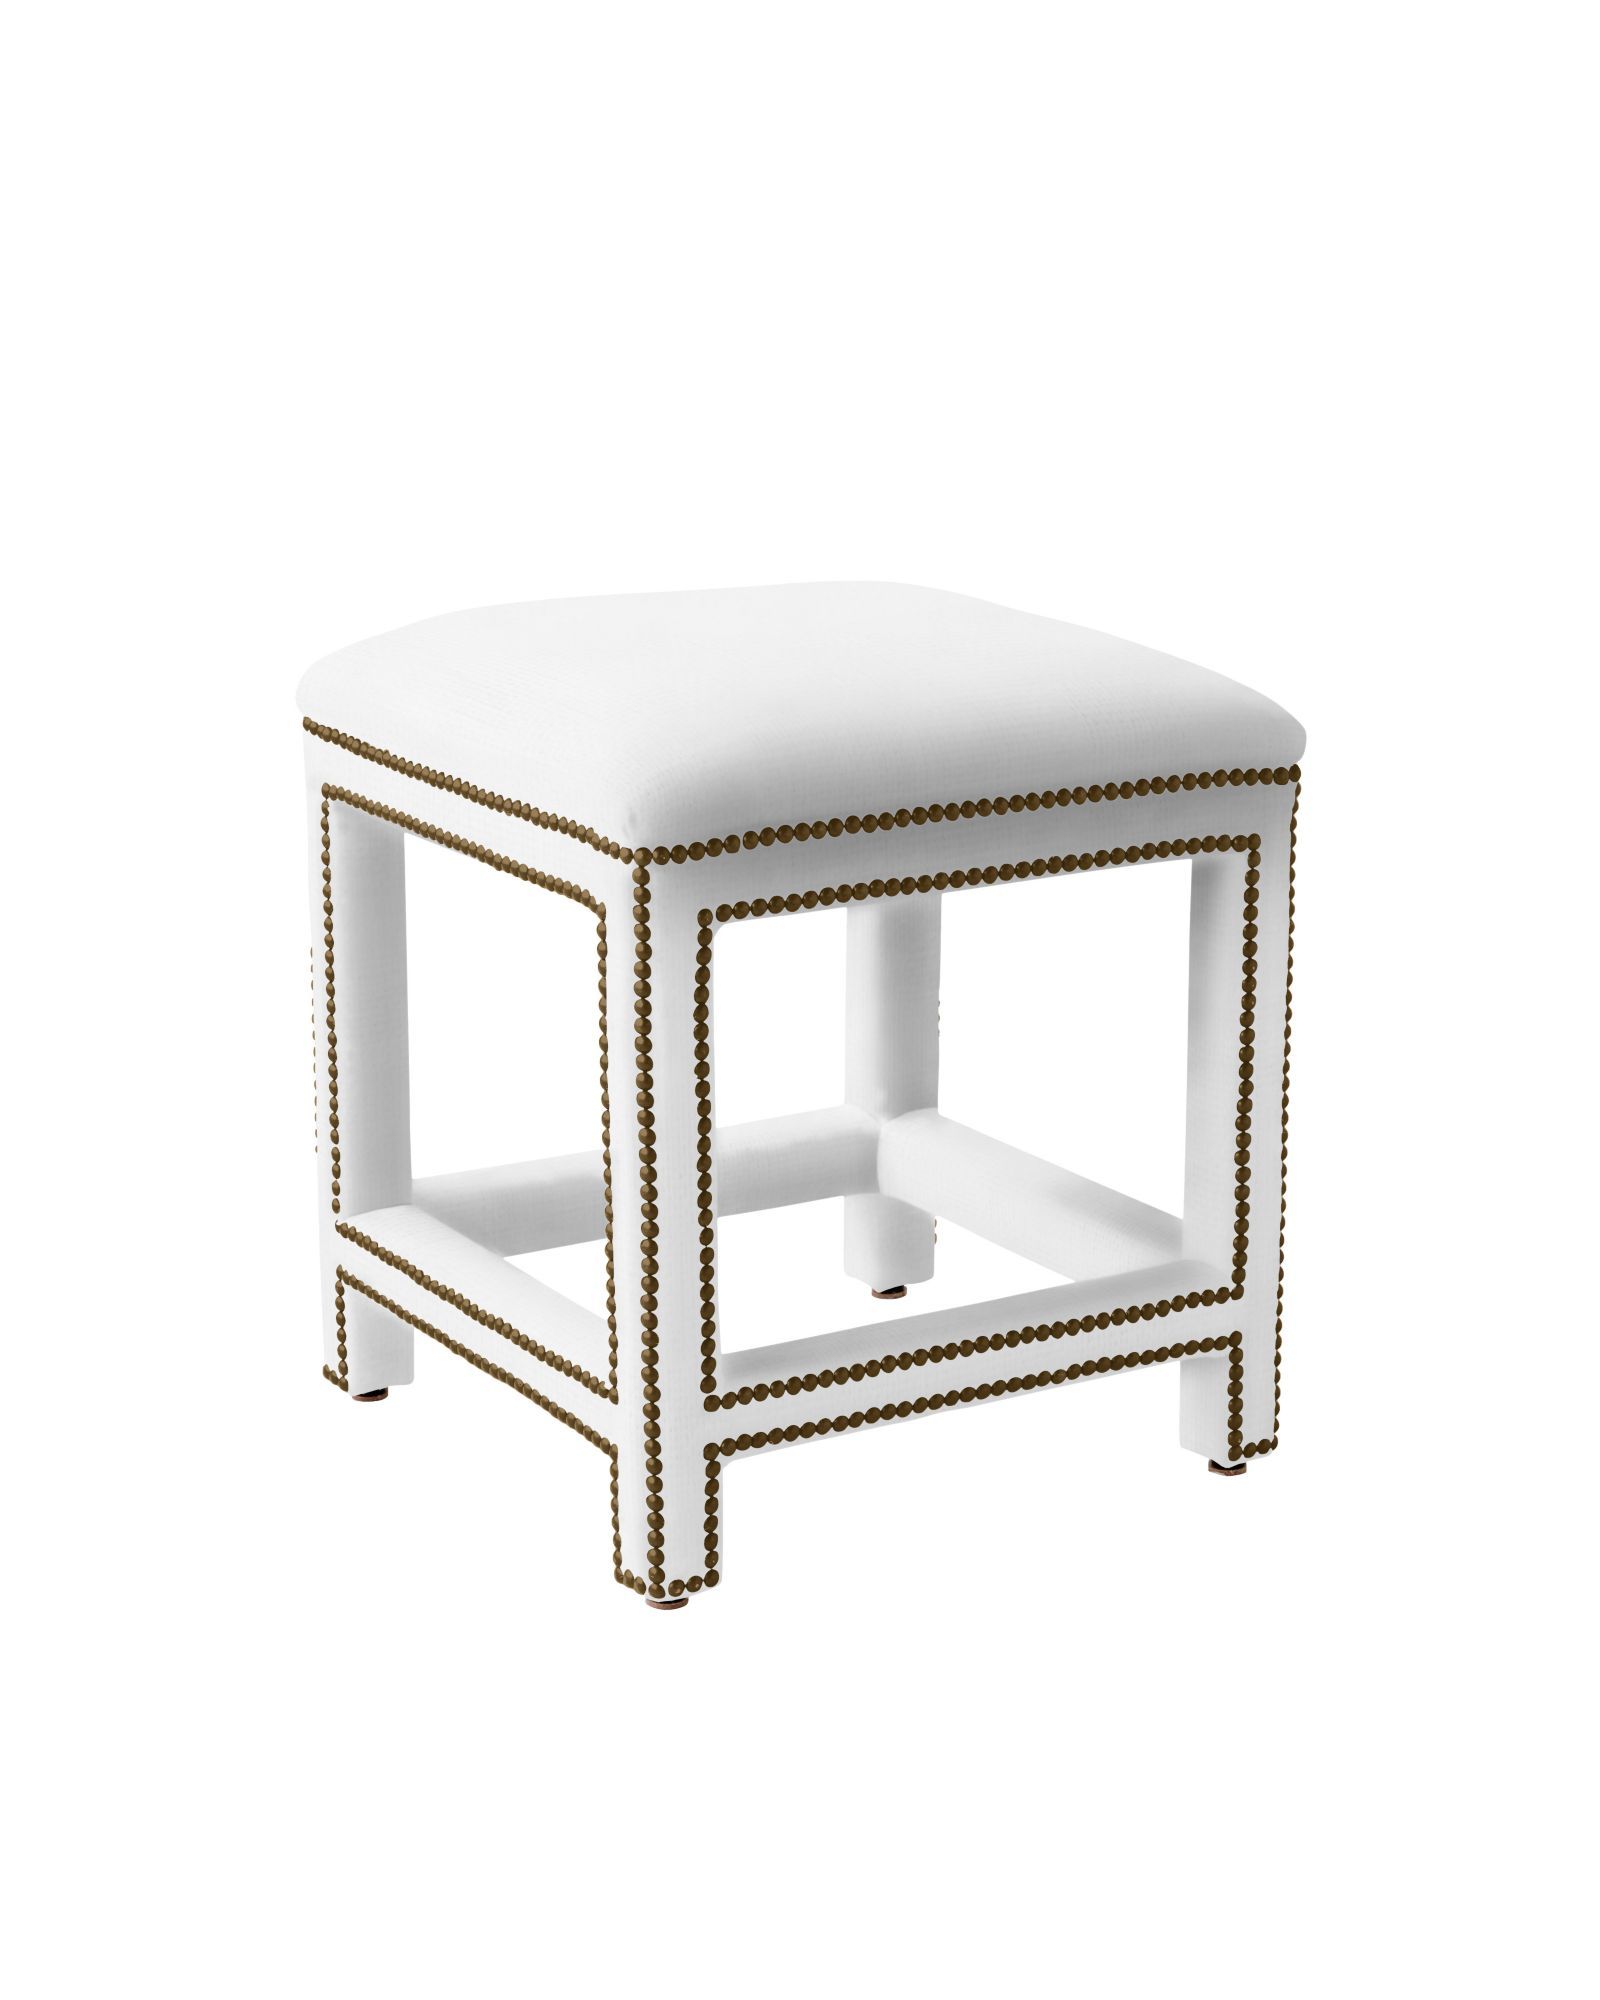 Dorset Stool with Nailheads | Serena and Lily